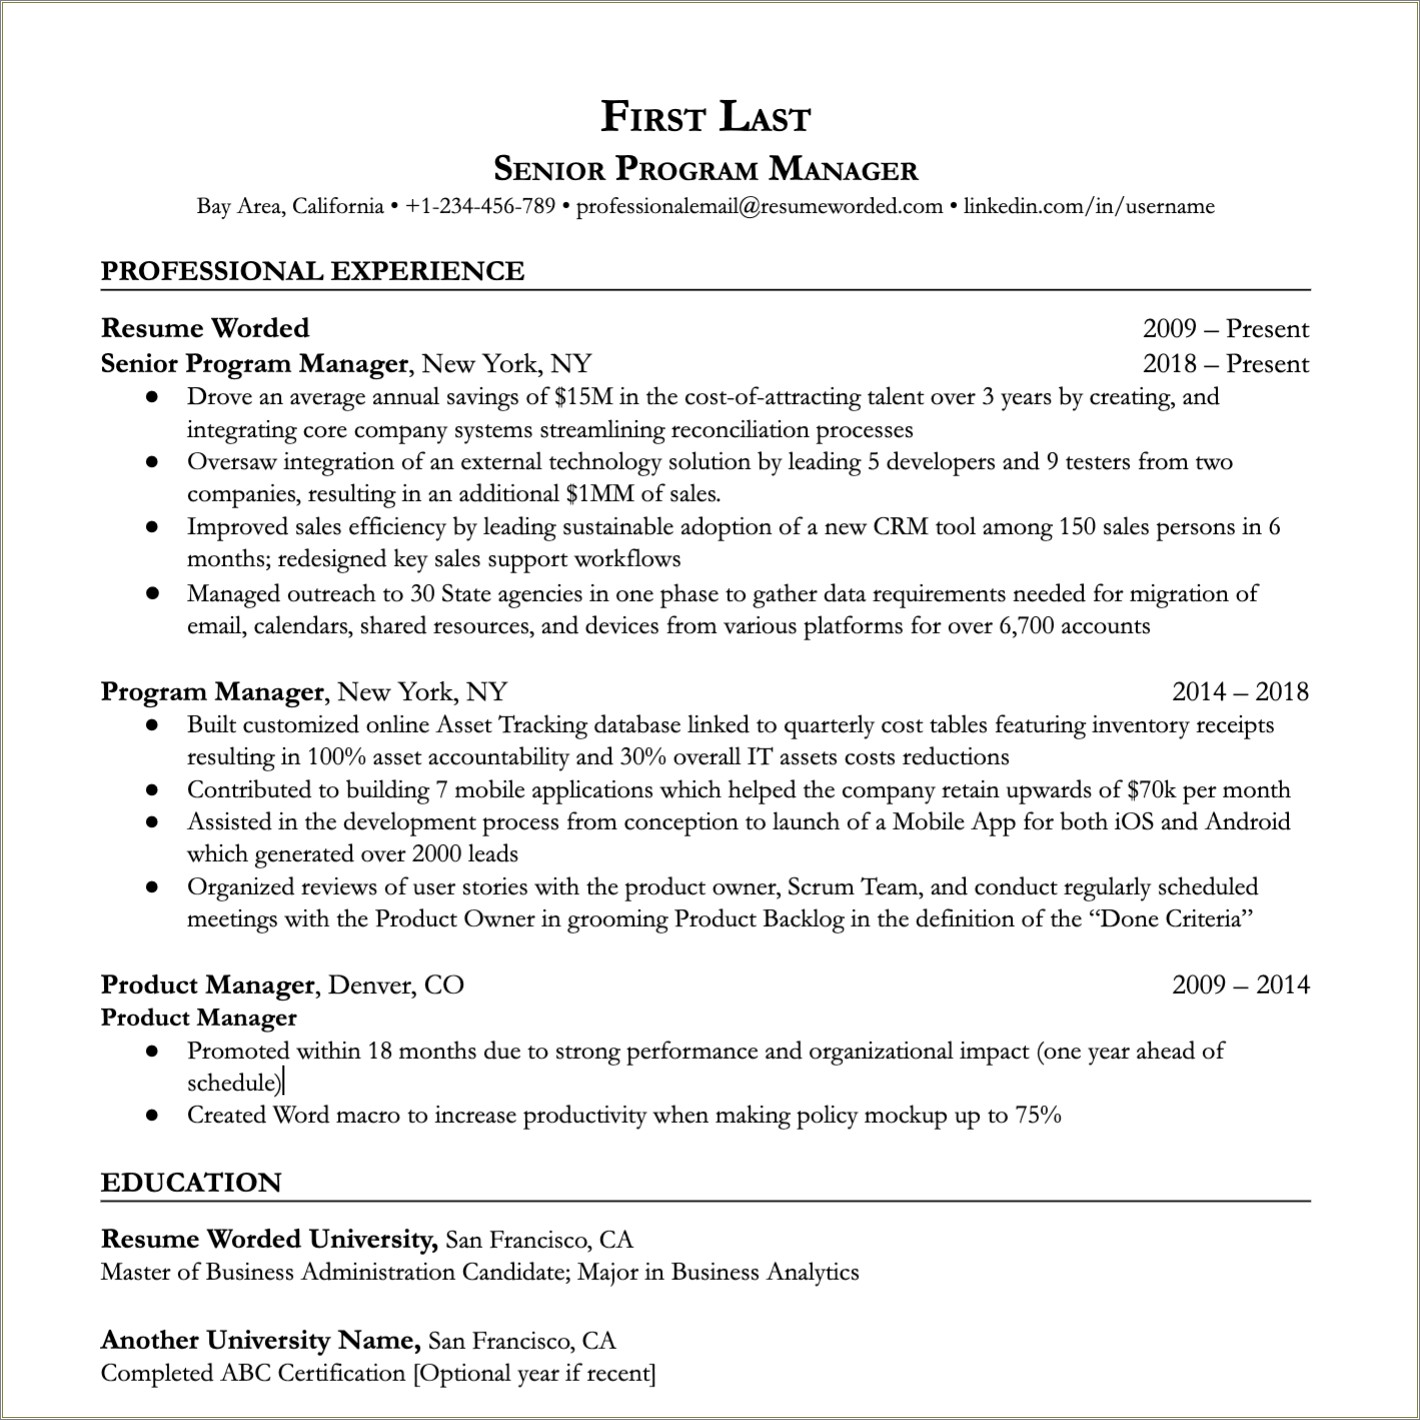 Sample Resume For Those Without Work Experience